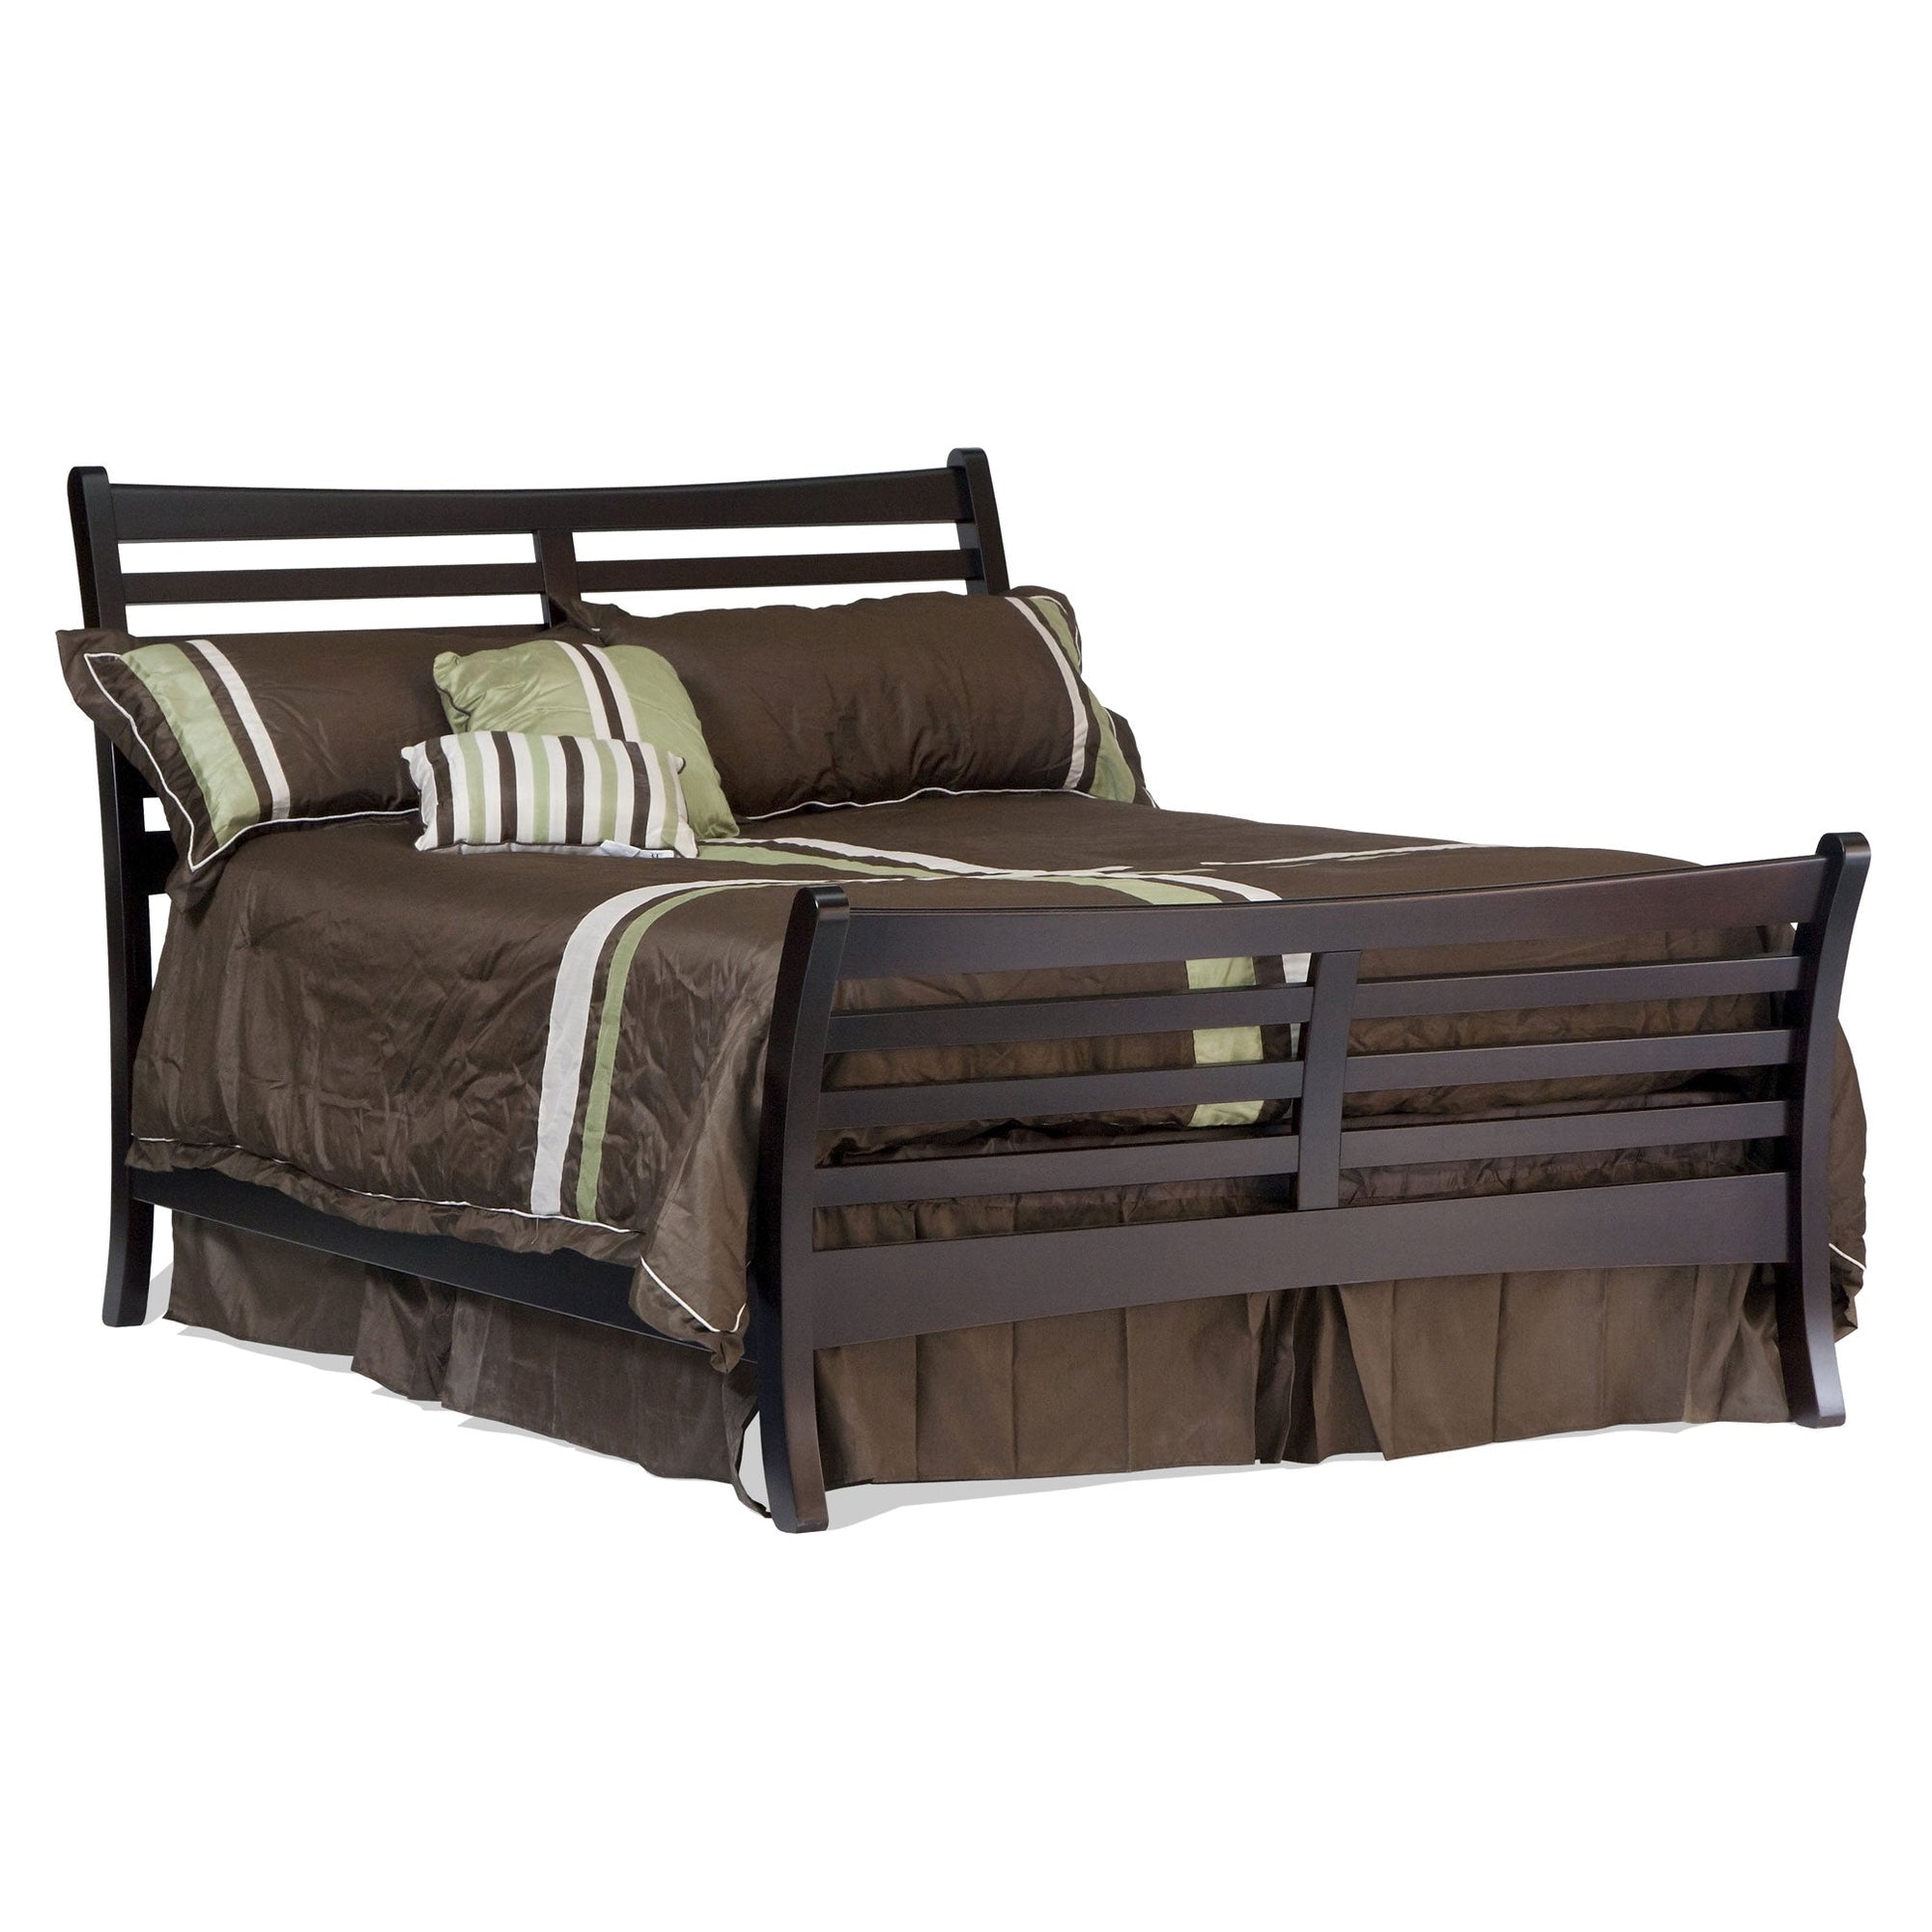 New Transitions Sleigh Bed - snyders.furniture